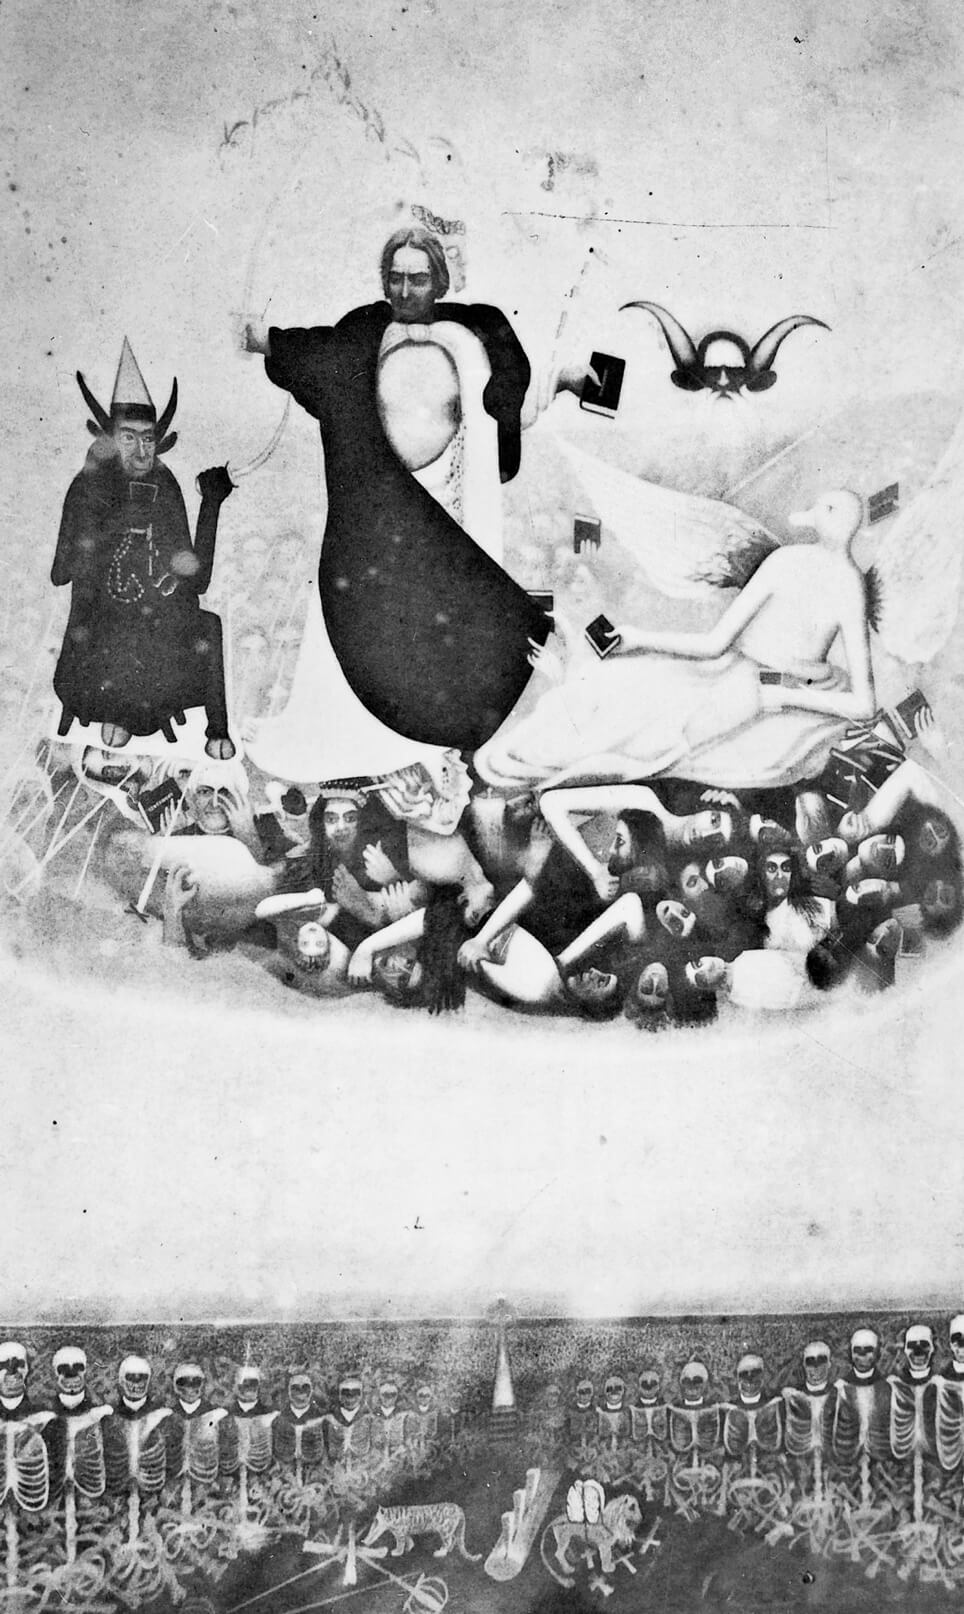 Reproduction of an undated painting by John Ballou Newbrough lost in a flood while in storage in El Paso, Texas. The complex iconography of the painting—said to be seventeen feet tall and ten feet wide—depicted a central tenet of Oahspe’s theology: that Christianity was founded when a powerful spirit usurped and distorted the teachings of the Jewish prophet Joshu/Jesus. Sometimes referred to as The Three Worlds, the painting depicts the three realms outlined in Oahspe—the work’s lower third, where the skeletons can be seen, depicts Corpor; the false God-Christ figure occupies the middle region, called Atmospherea; and the now-faded upper portion represents Etherea, the higher heavens. Thanks to Leslee Alexander for her assistance with the captions for this article.